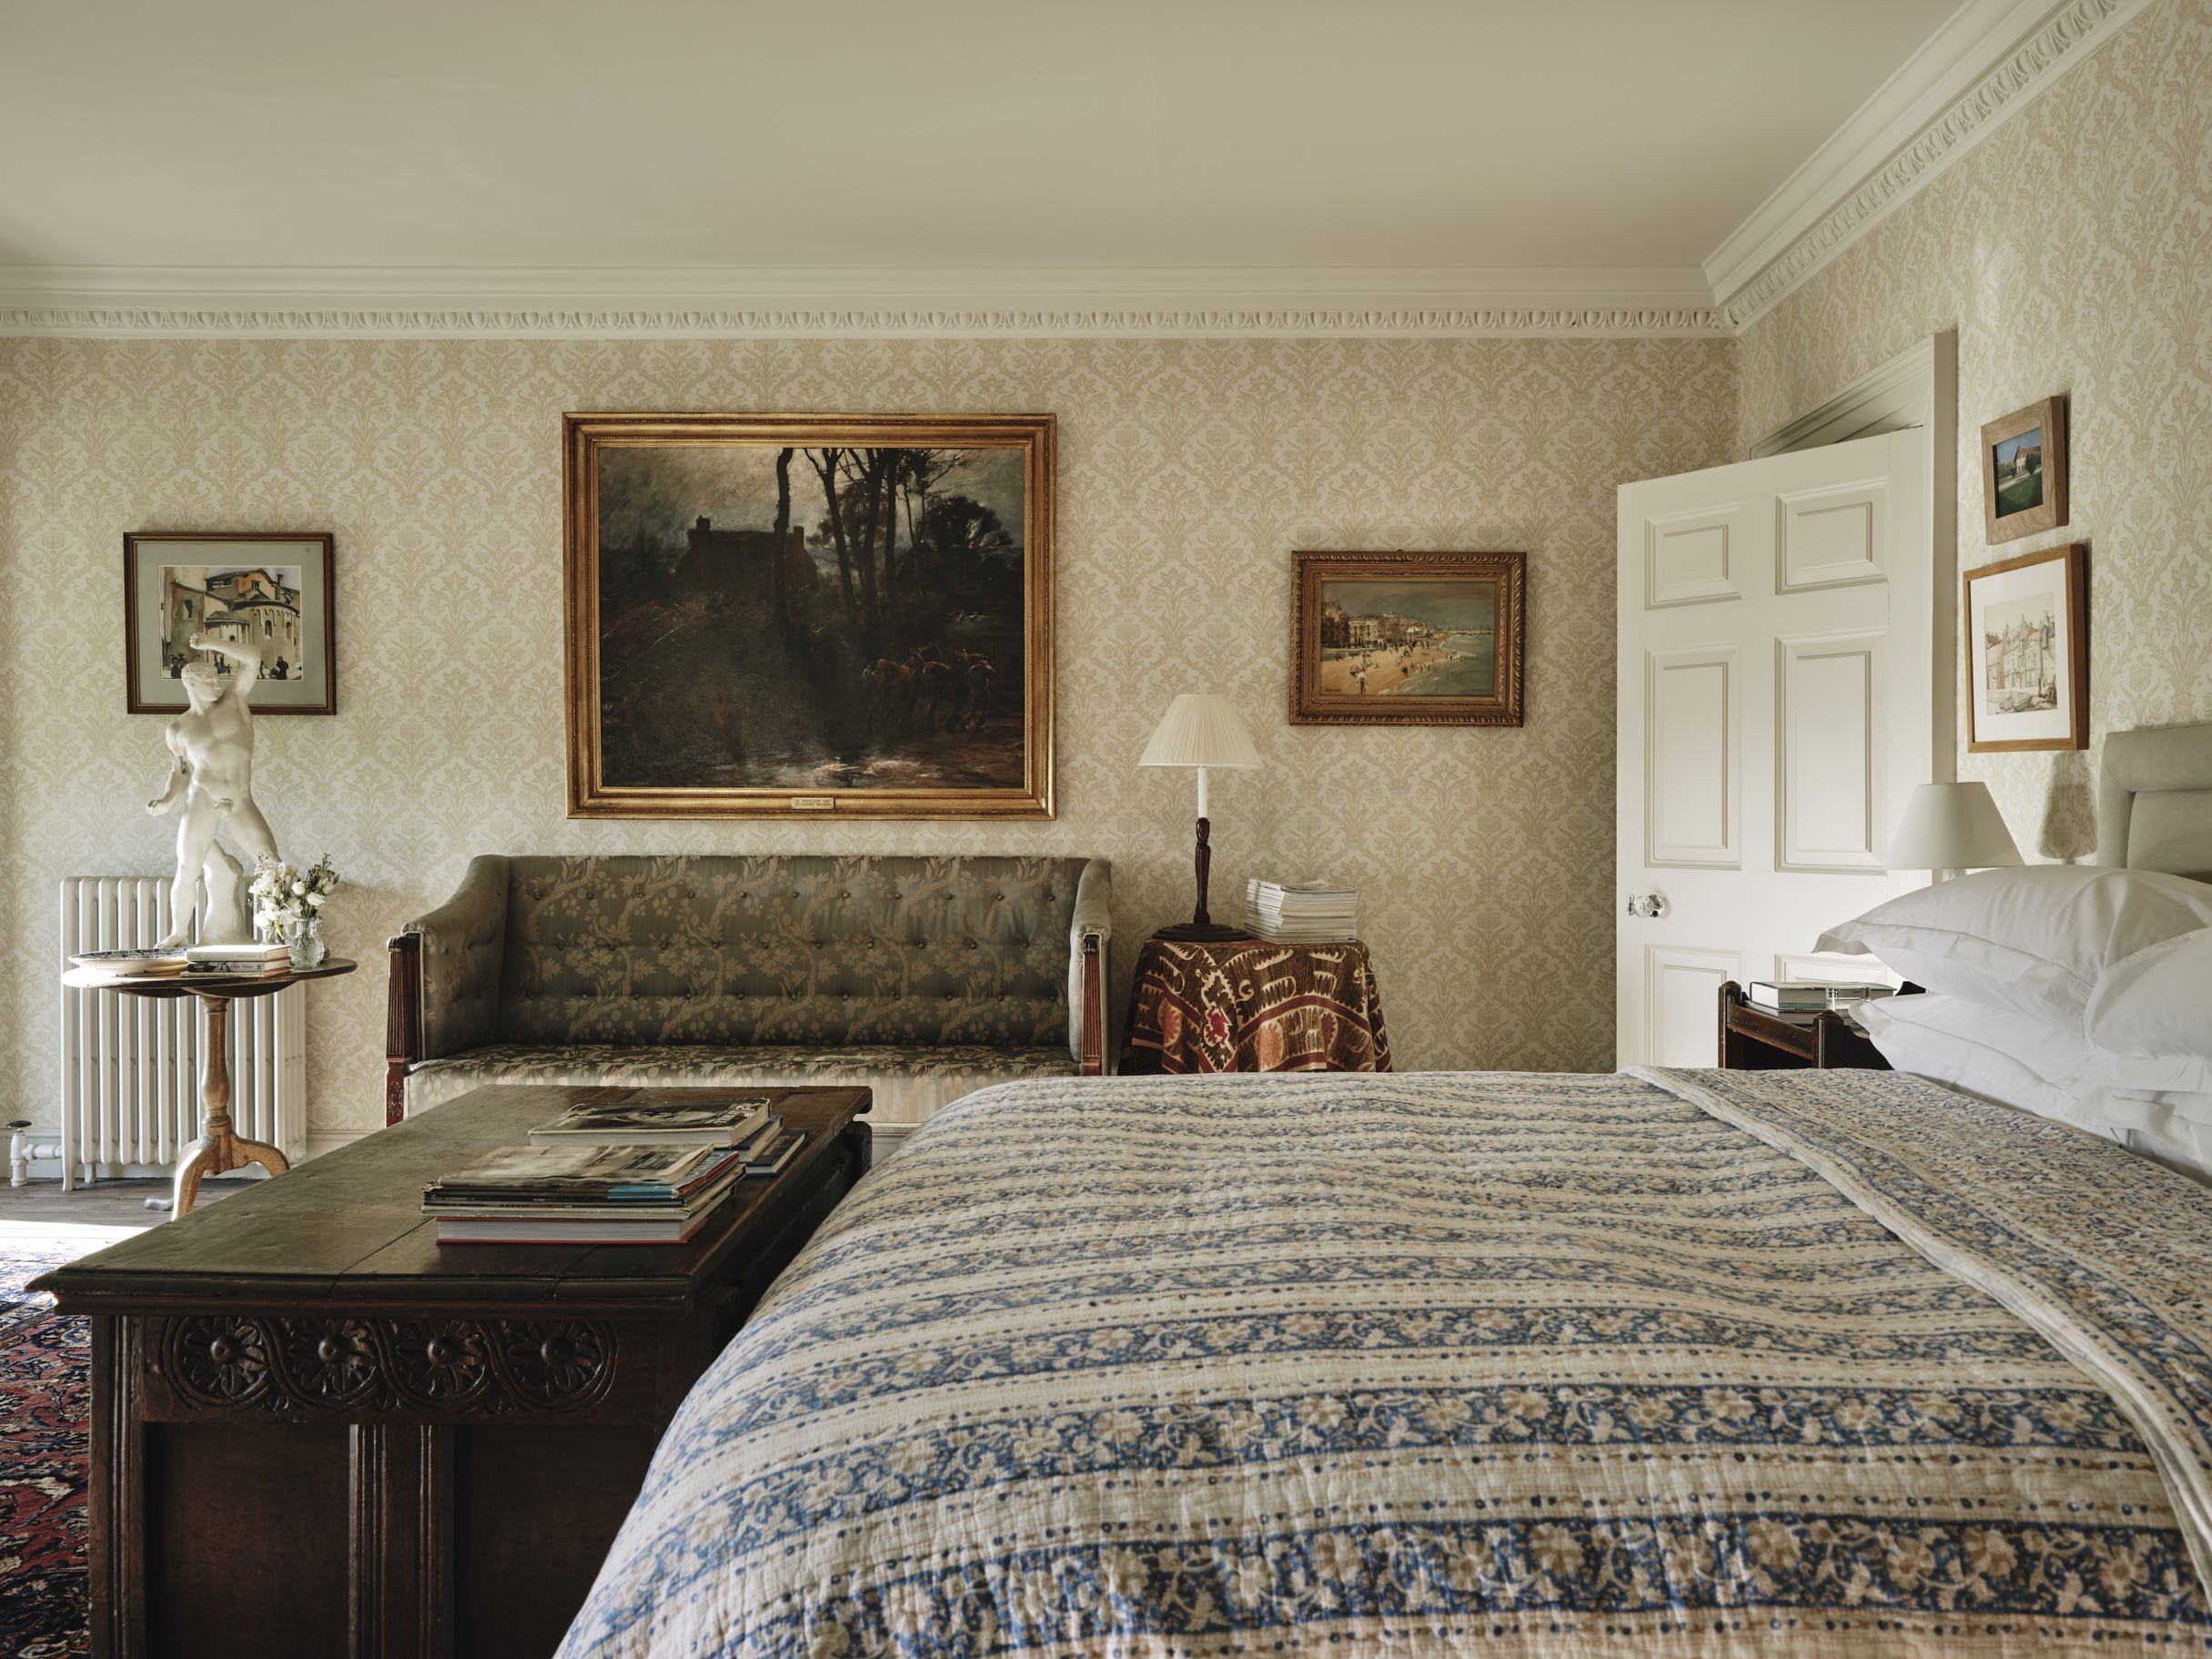 Bedroom at Wolterton Hall in Effect Magazine